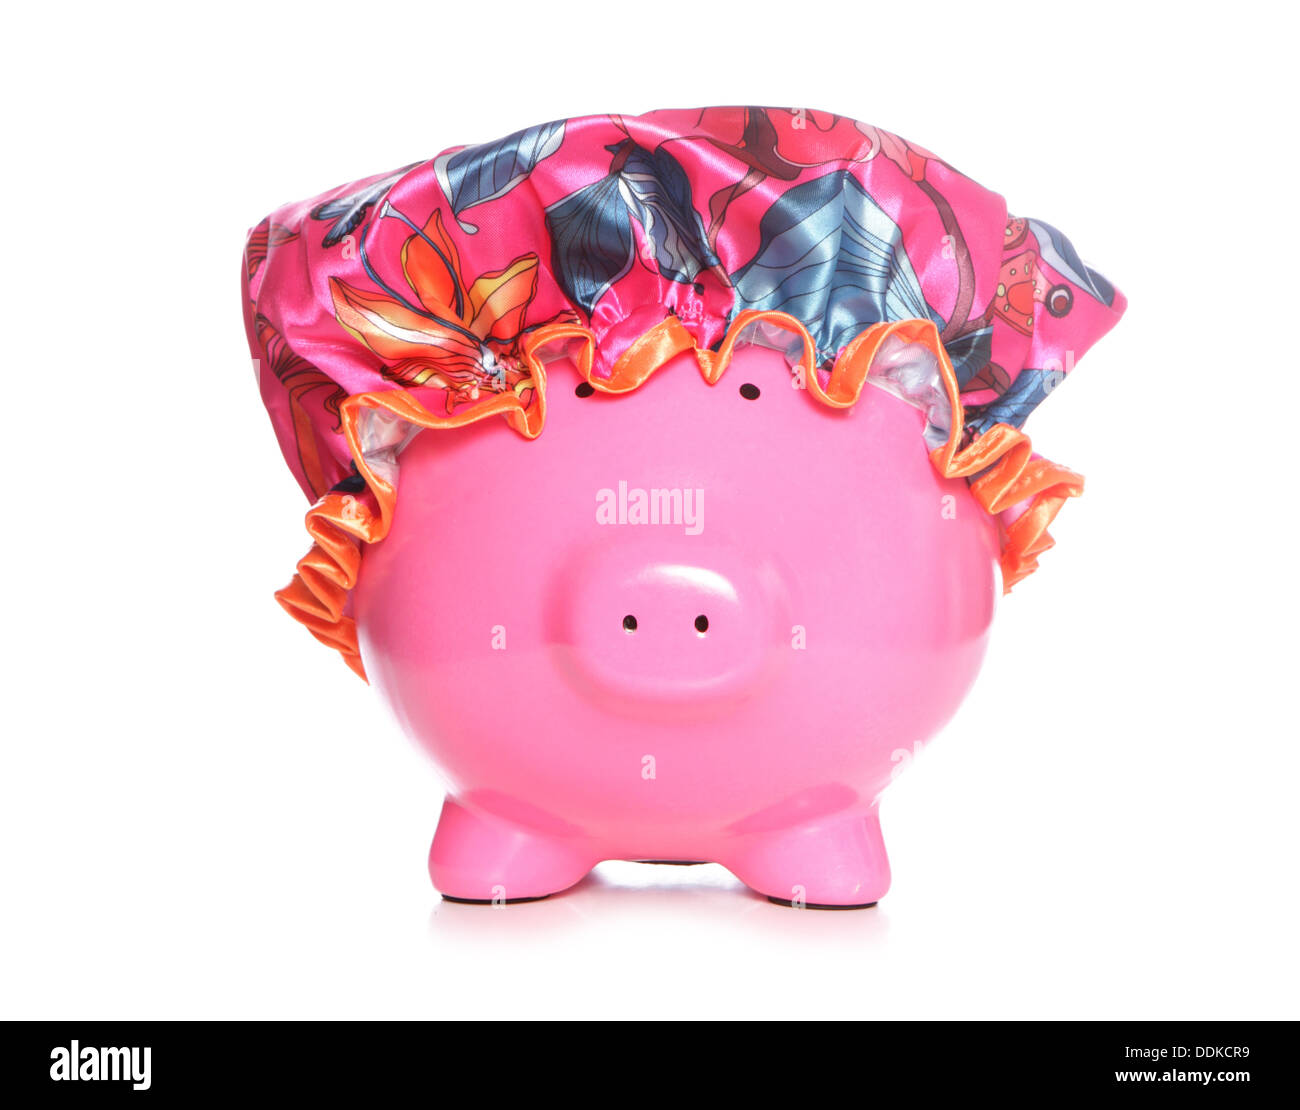 piggy bank wearing shower hat on white background Stock Photo